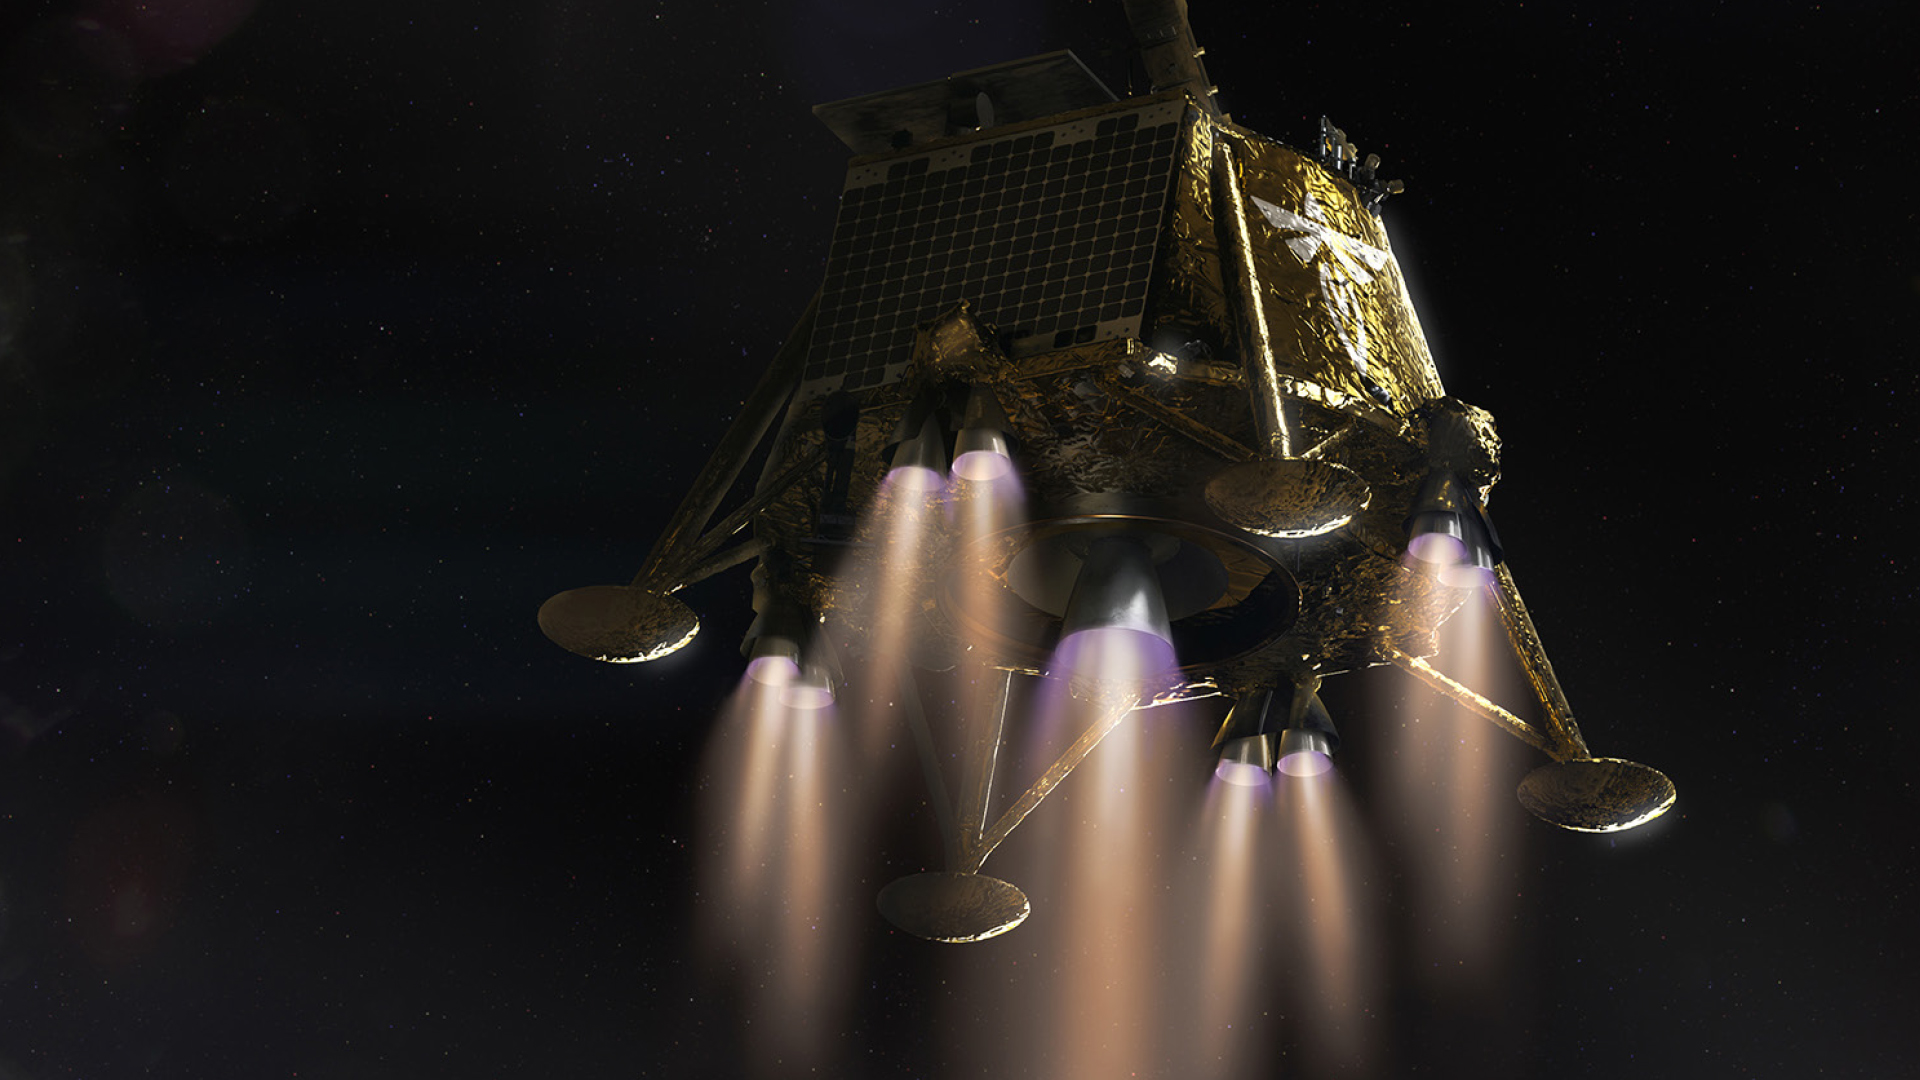 A rendering of Firefly's Blue Ghost 1 lunar lander descending to the surface of the Moon. The thrusters are firing.